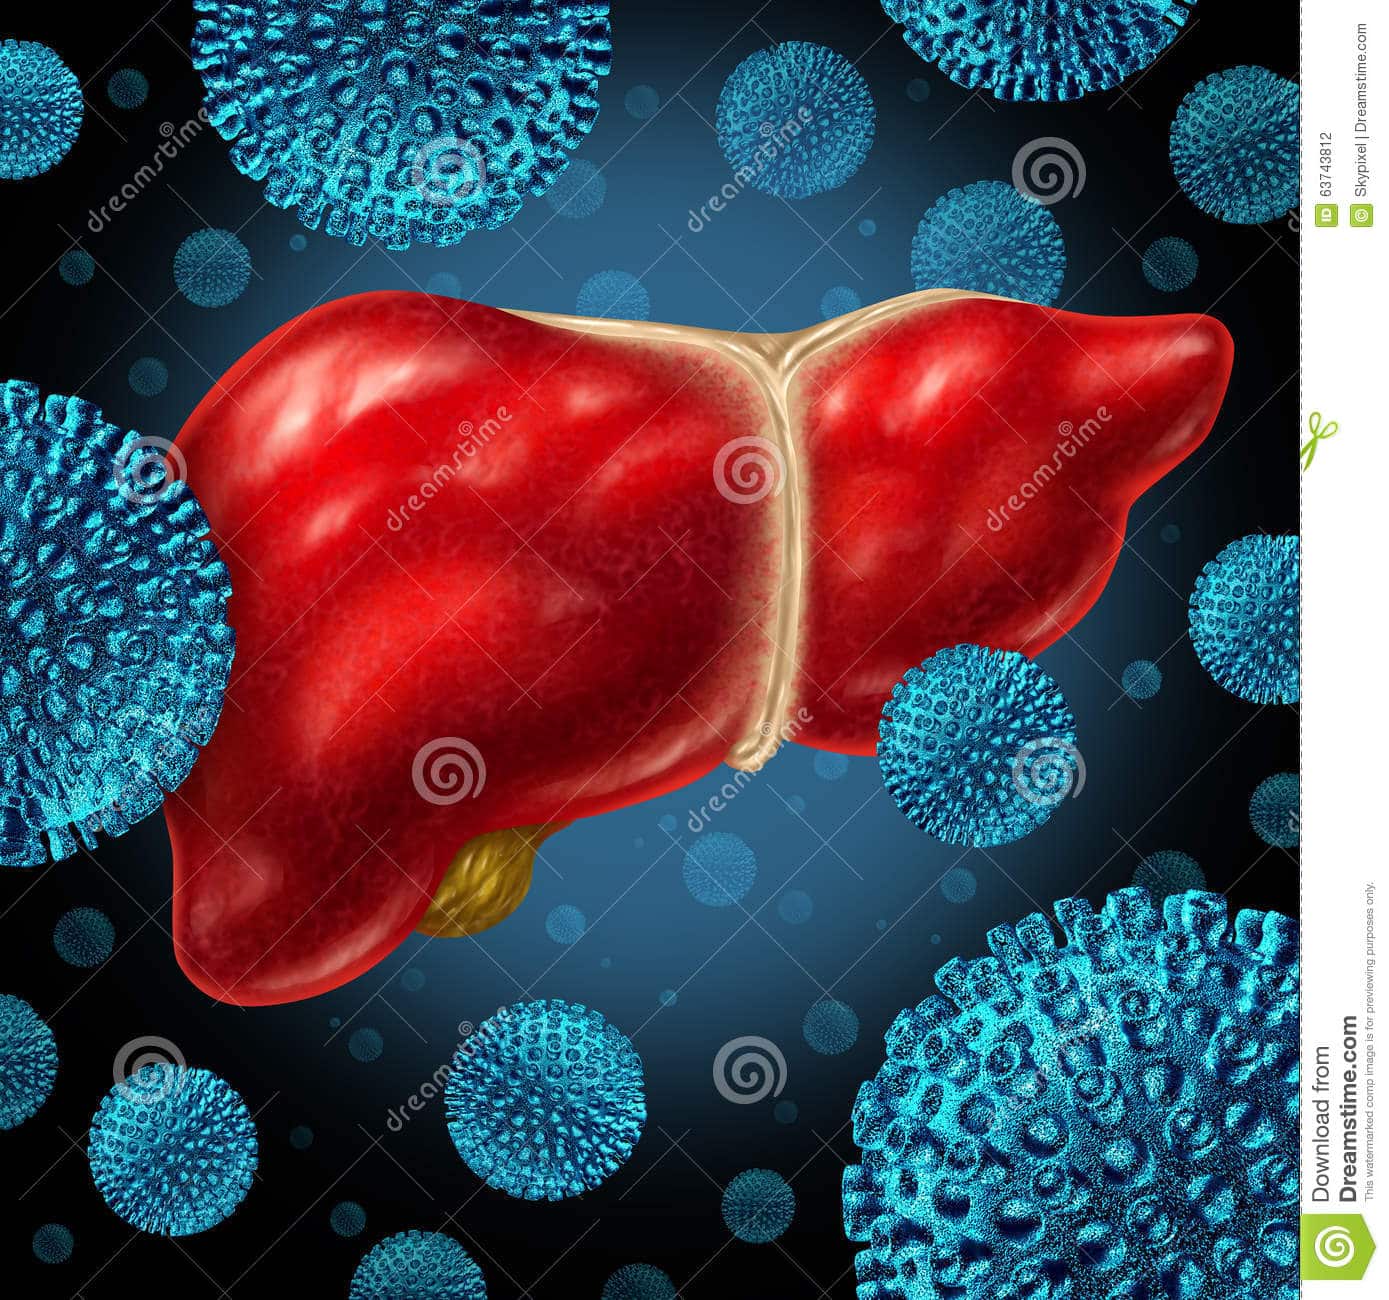 Hepatitis Liver Infection stock illustration. Image of infection